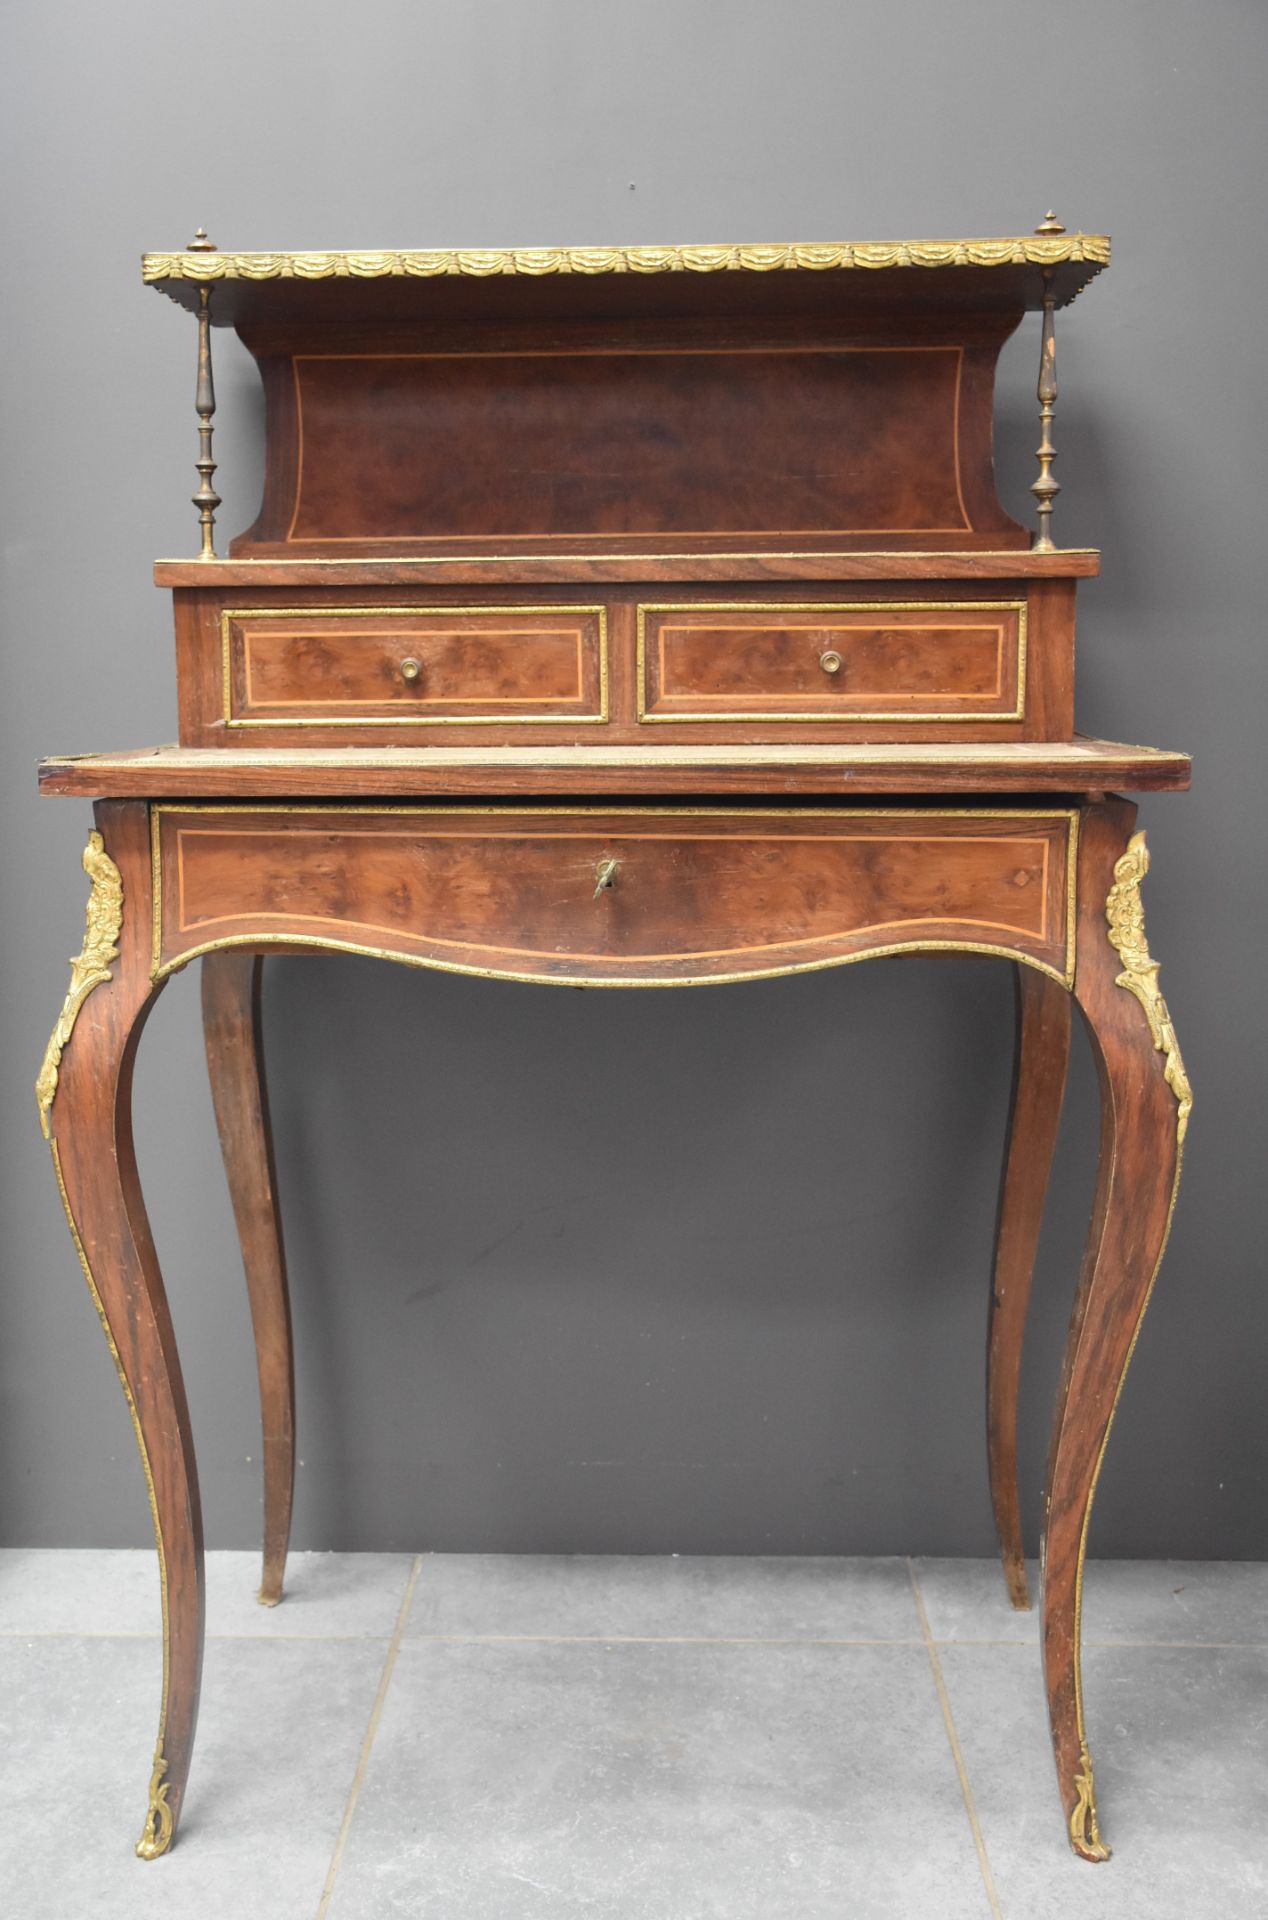 Napoleon III style stepped lady's desk. French work in veneer and bronze ornaments. Height: 116 cm.